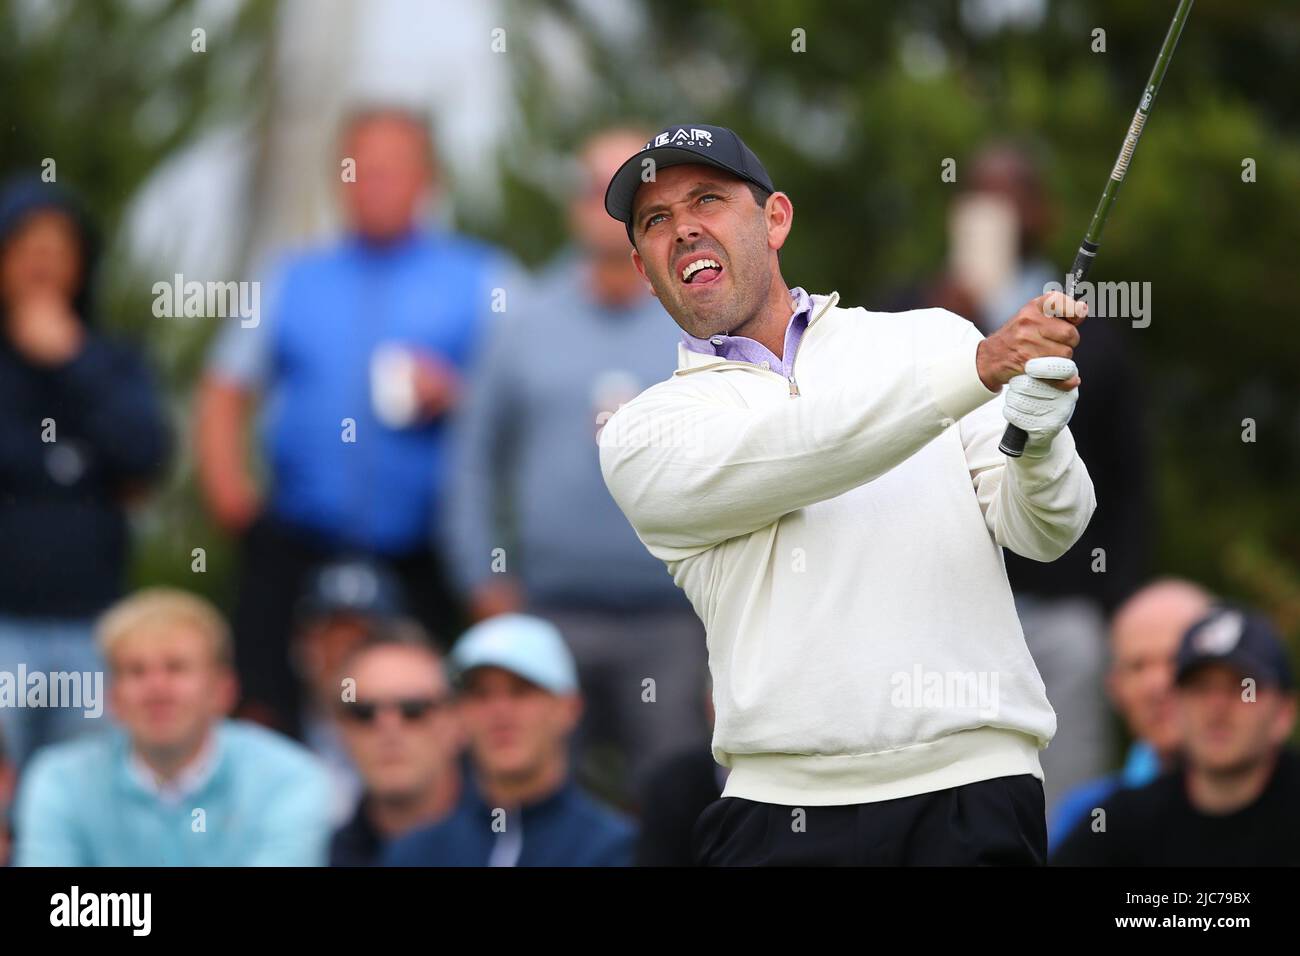 ST ALBANS, ENGLAND - JUNE 09: Charl Schwartzel of South Africa tees off on the 17th hole during day one of the LIV Golf Invitational at The Centurion Club on June 9, 2022 in St Albans, England. (MB Media) Stock Photo